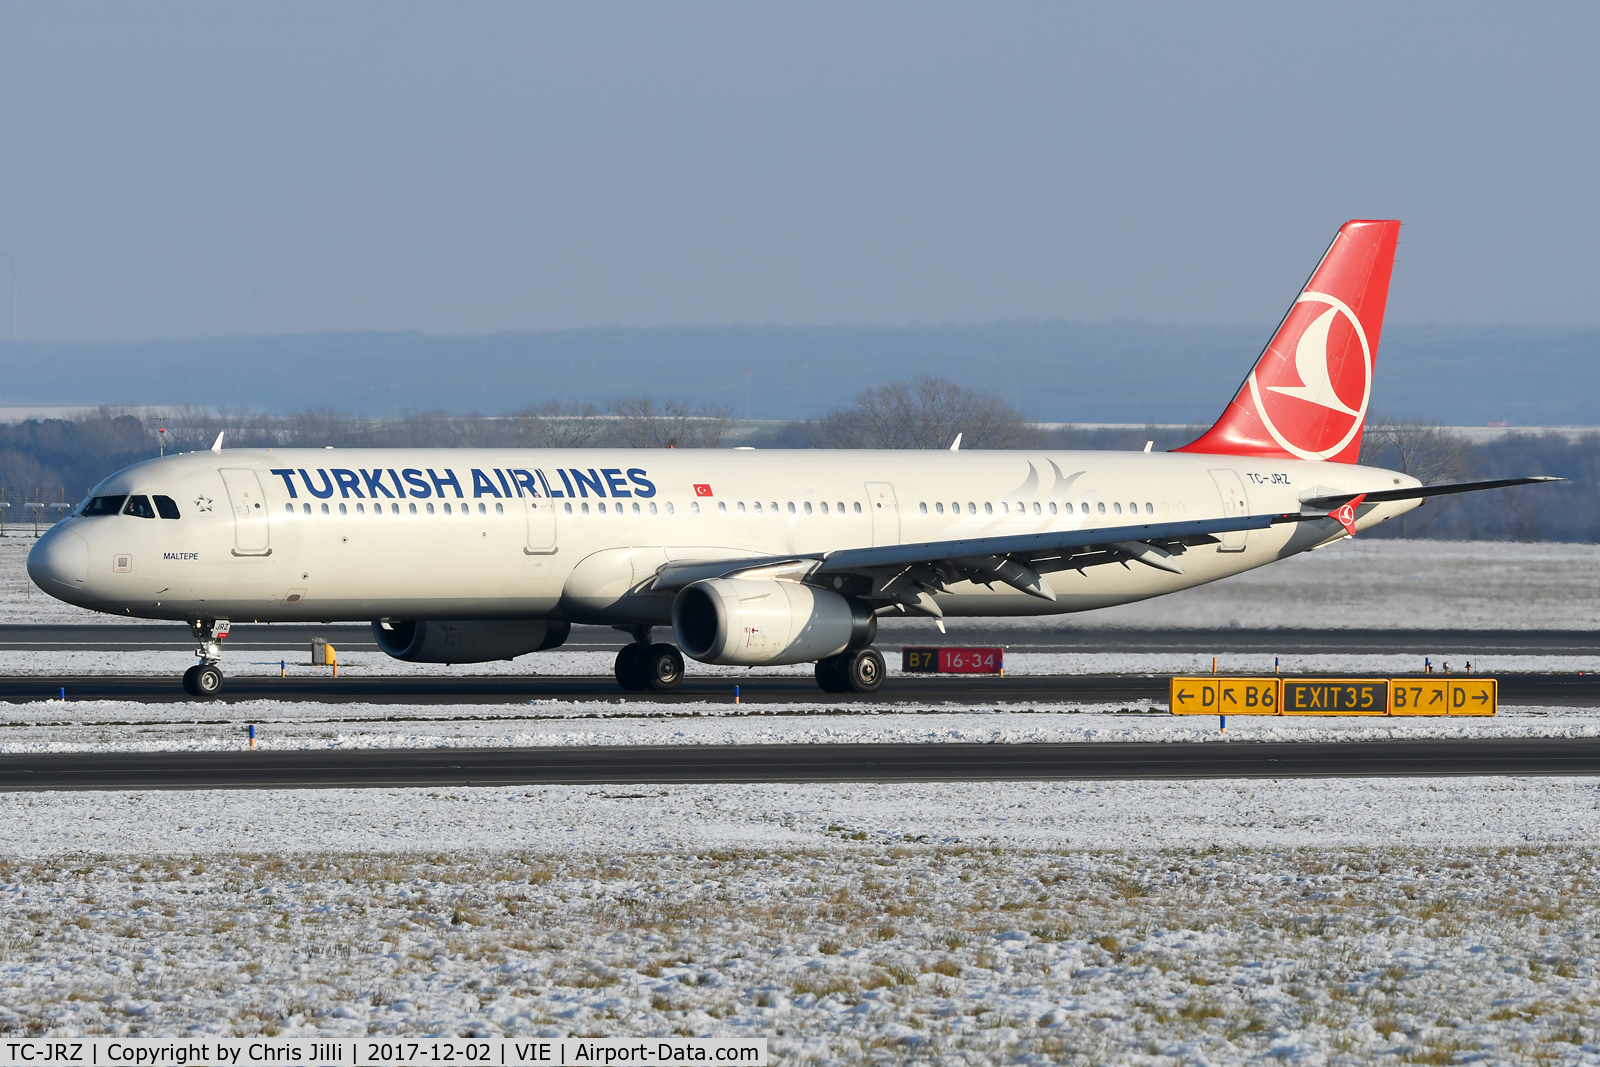 TC-JRZ, 2012 Airbus A321-231 C/N 5118, Turkish Airlines